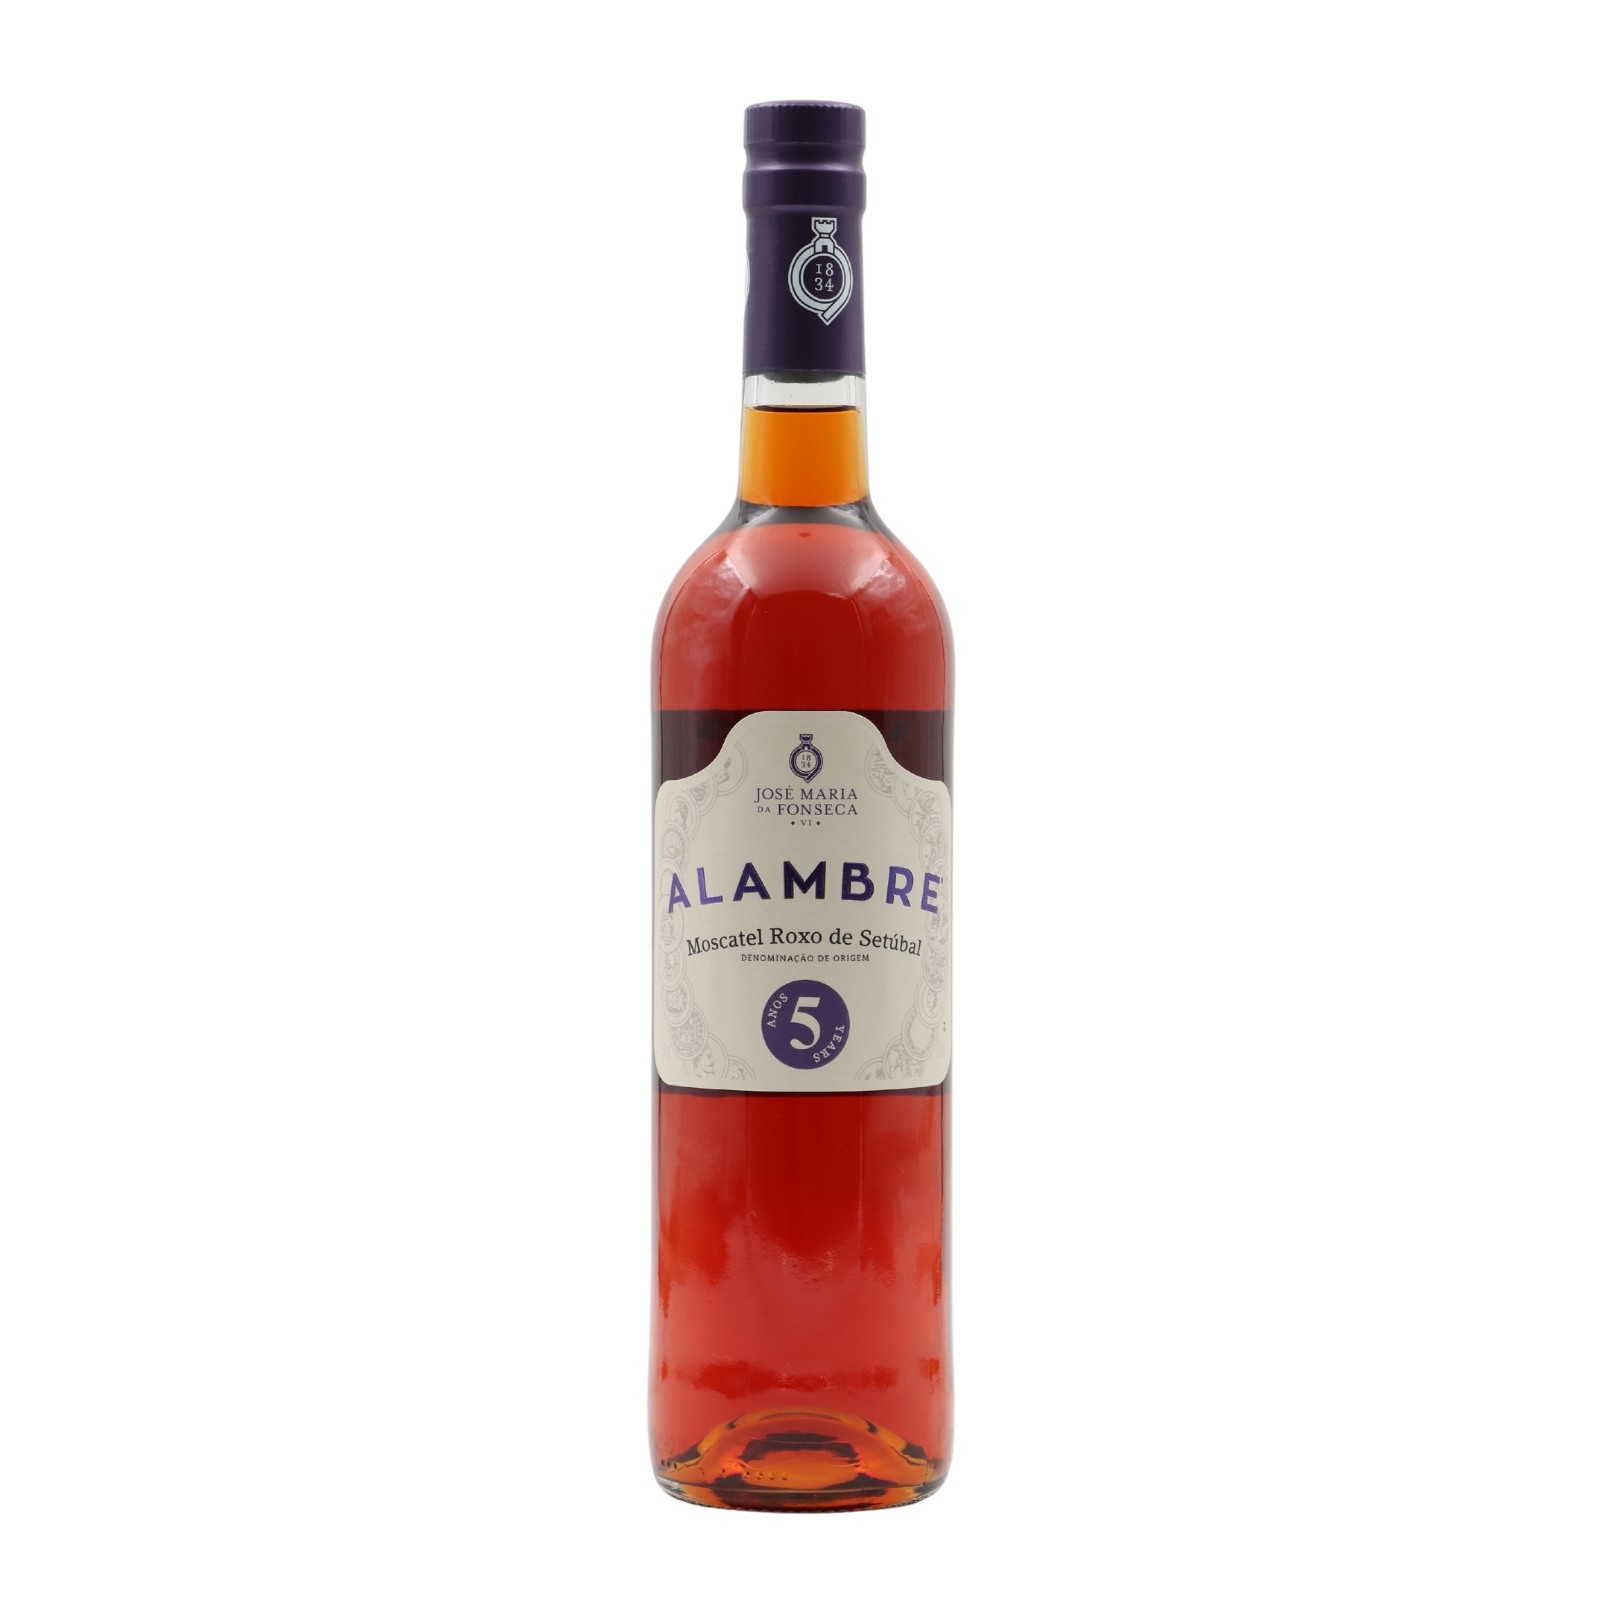 Alambre Moscatel Roxo 5 years